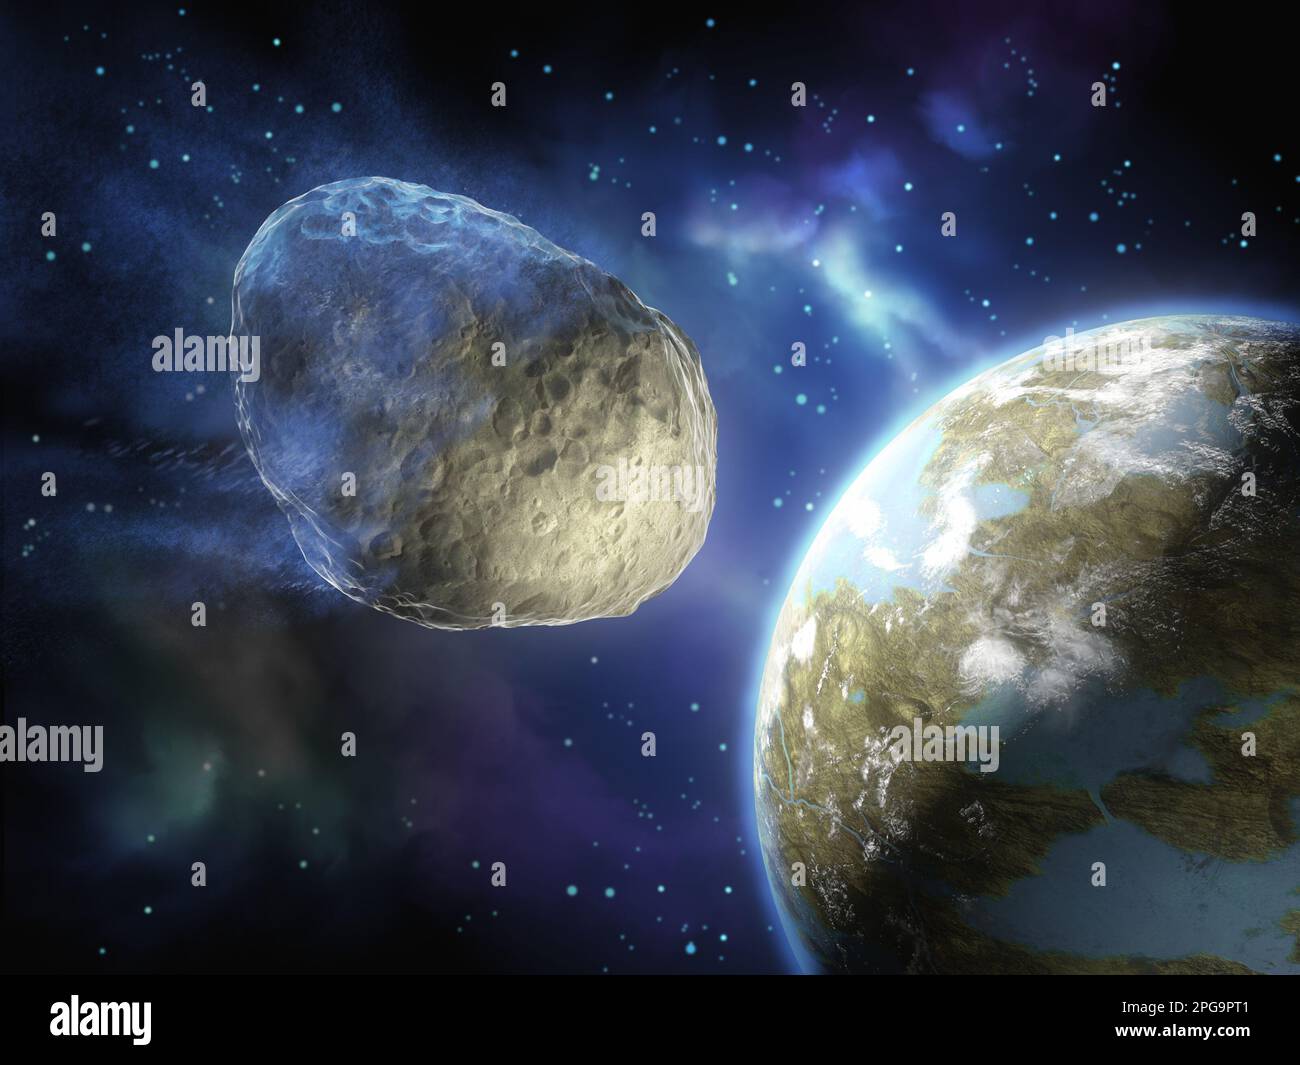 Asteroid on a collision path with an Earth-like planet. Digital illustration, 3d rendering. Stock Photo